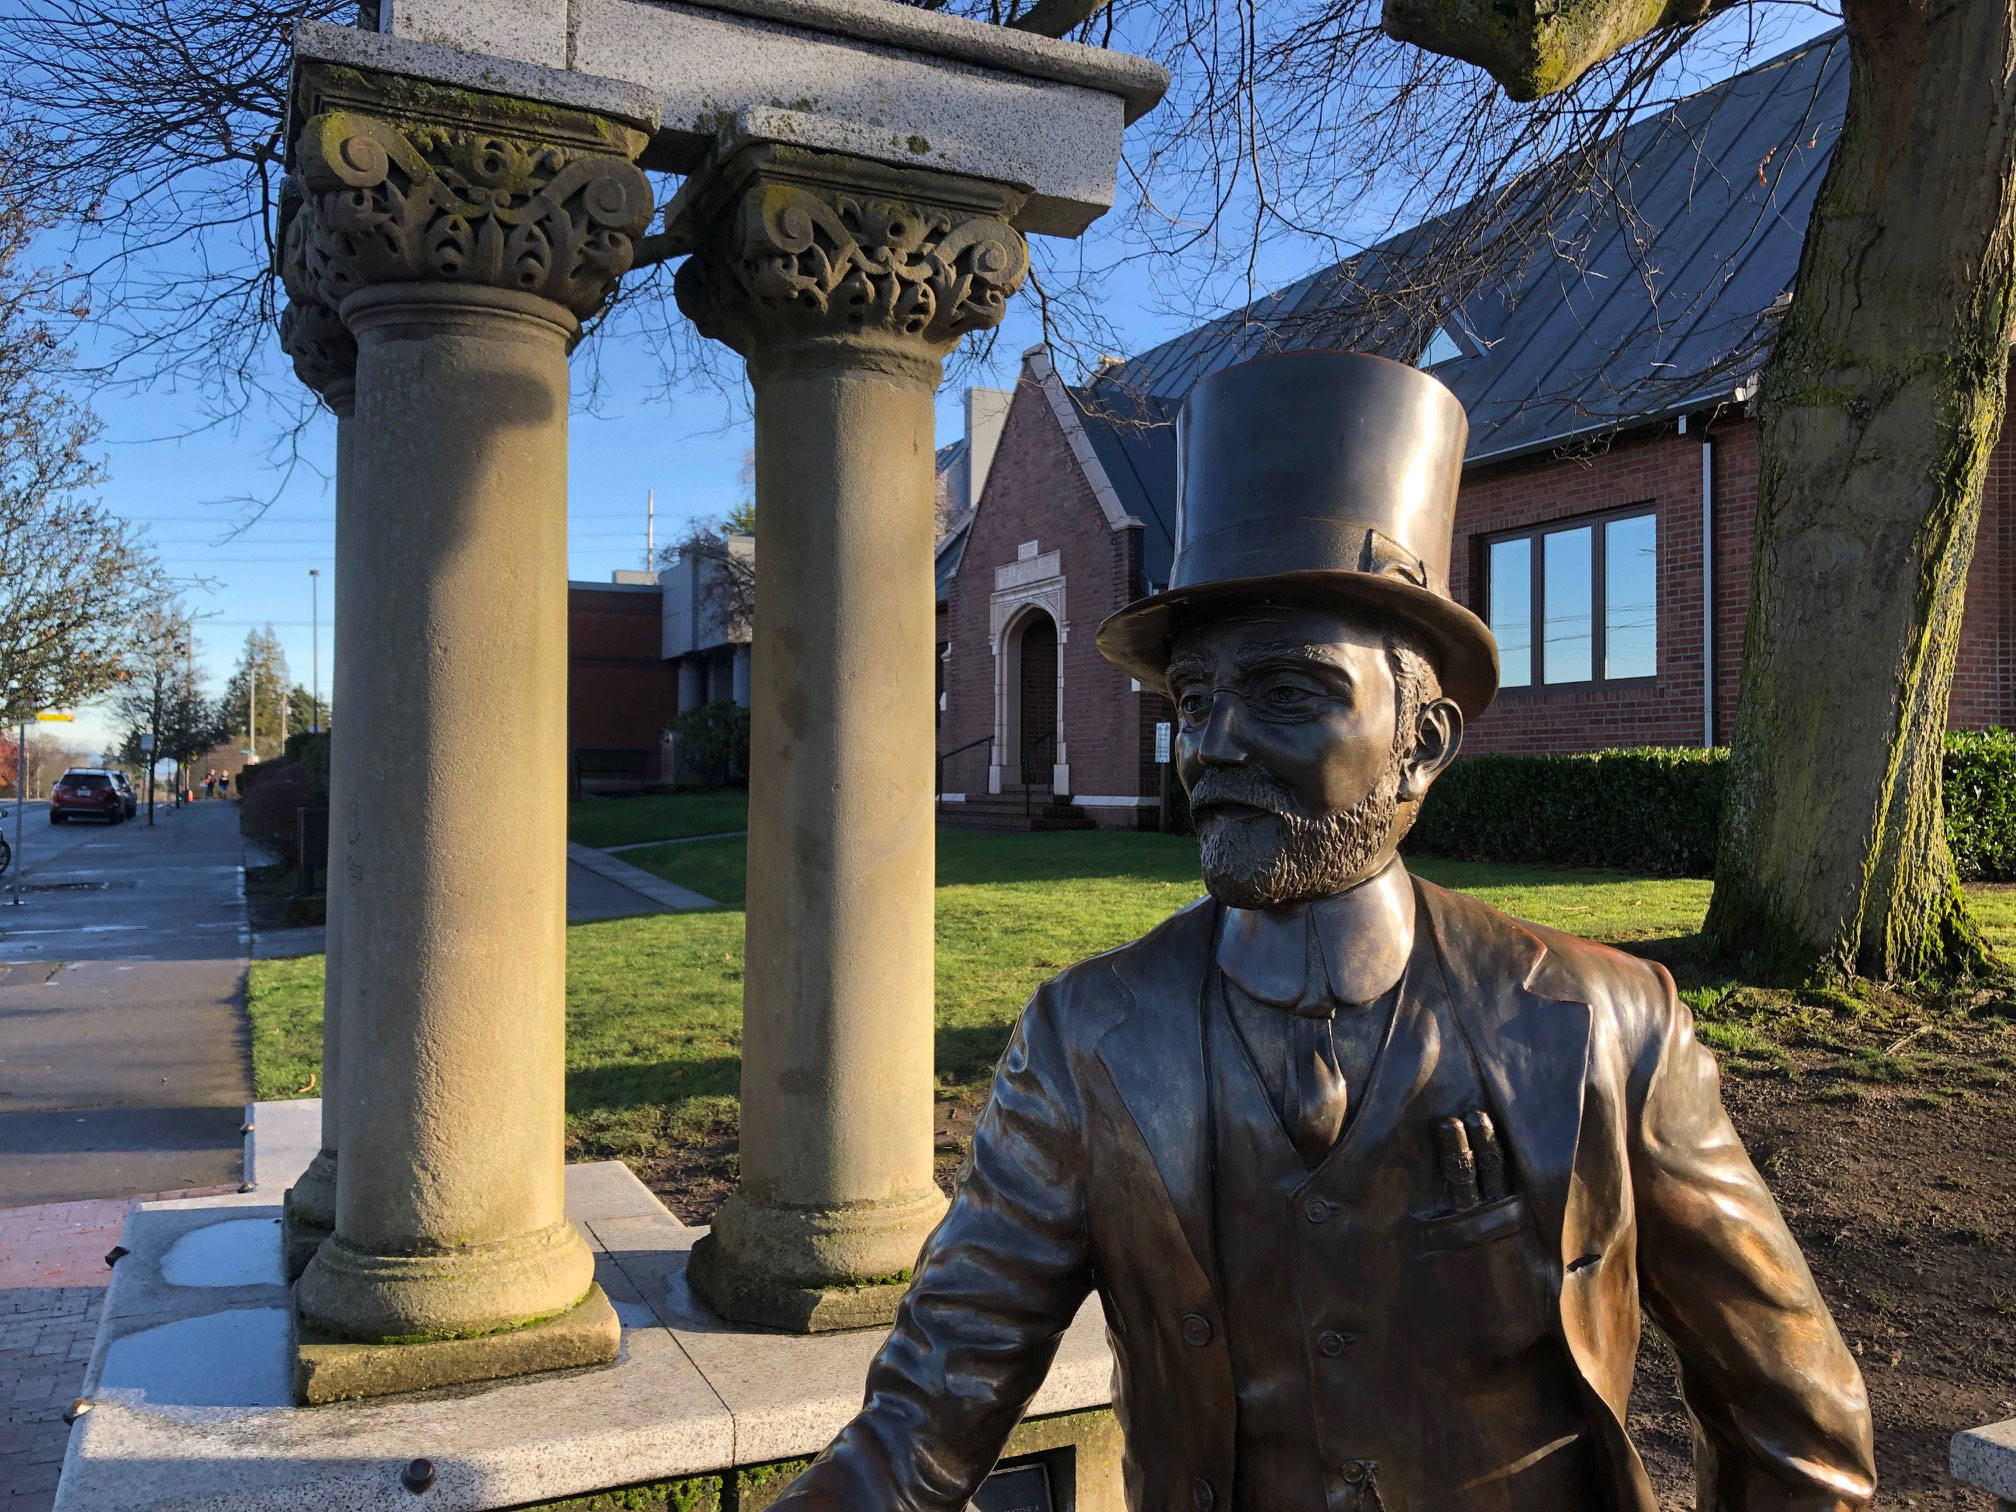 Allen C. Mason statue in the Allen C. Mason Plaza on the corner of North 26th and Adams, adjacent to Tacoma Public Library’s Wheelock Branch. The work of local artist Paul R. Michaels, commissioned by the Proctor District Association and the Tacoma Historical Society. Mr. Mason always leans into the future, sports a jaunty top hat, extends a welcoming hand and is remembered as “Tacoma’s Best Salesman.”  Photo: Morf Morford